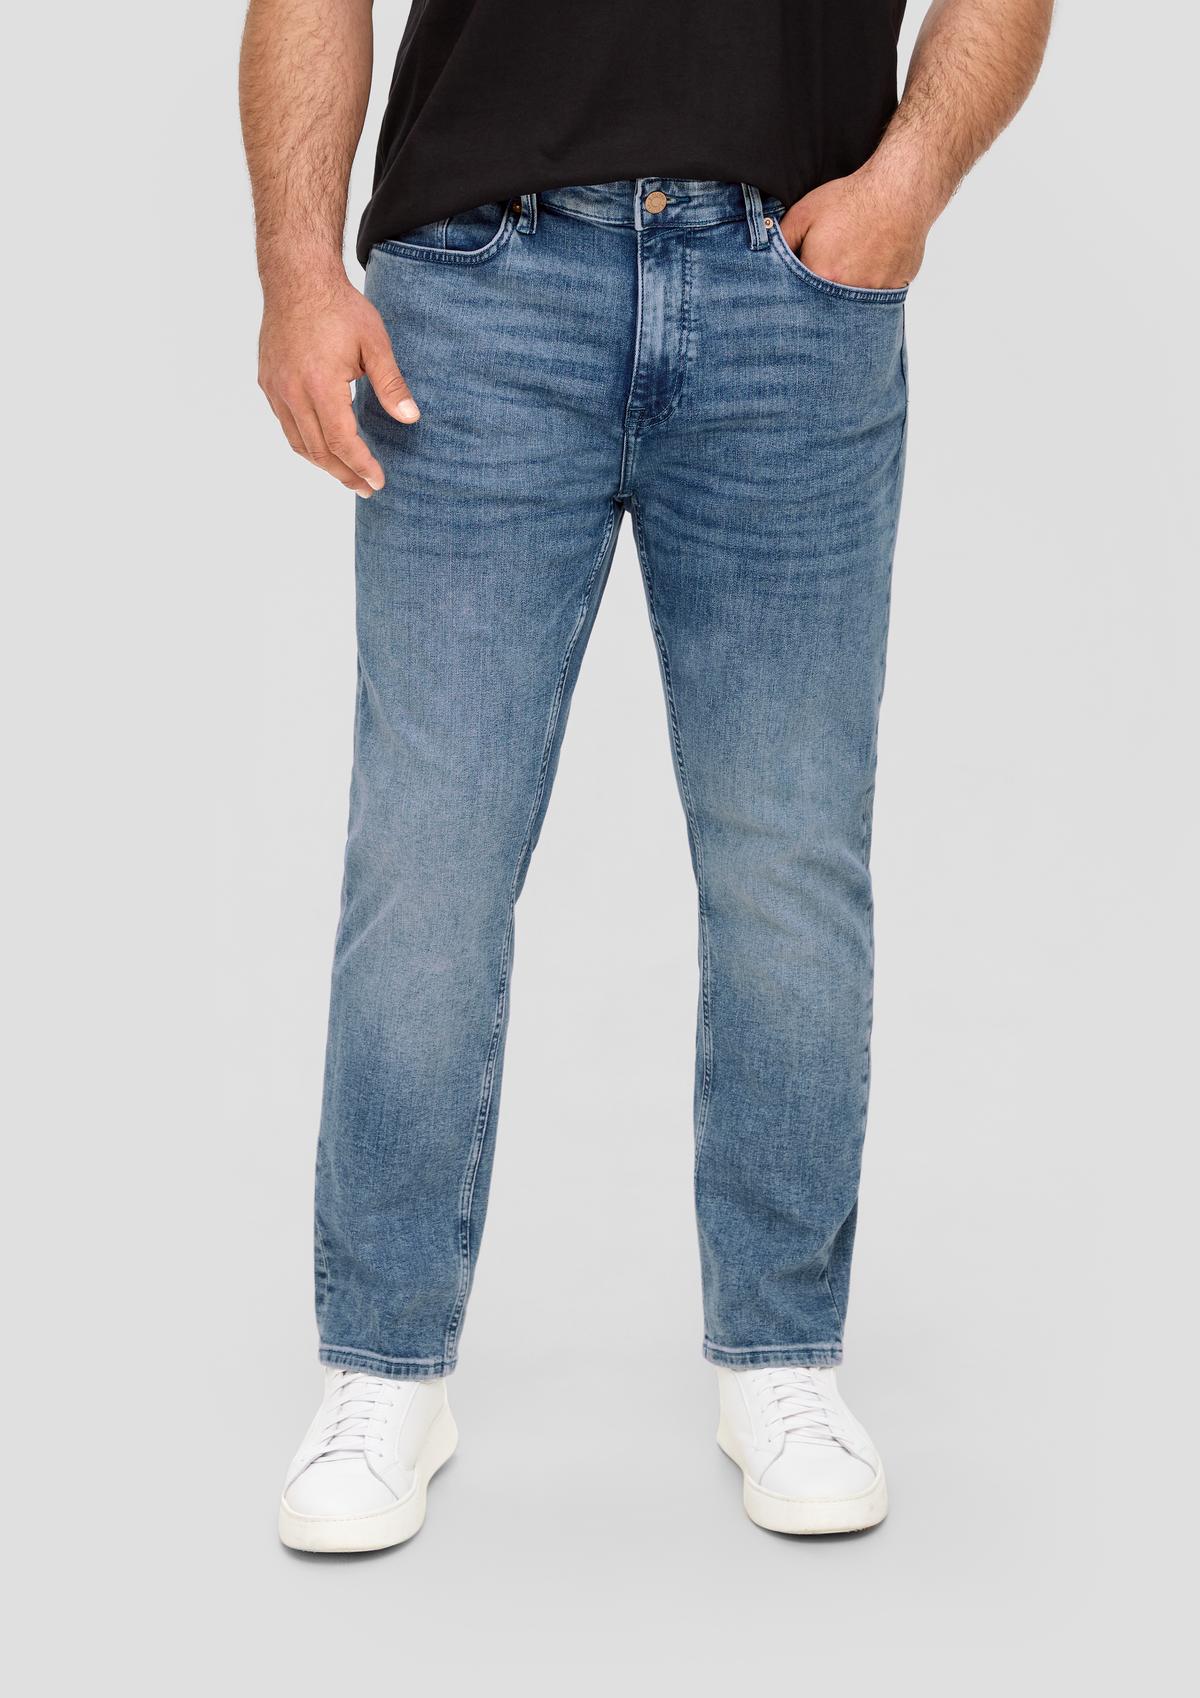 Jeans / Regular Rise Fit blue deep Tapered / Leg - Style / Mid / 5-Pocket